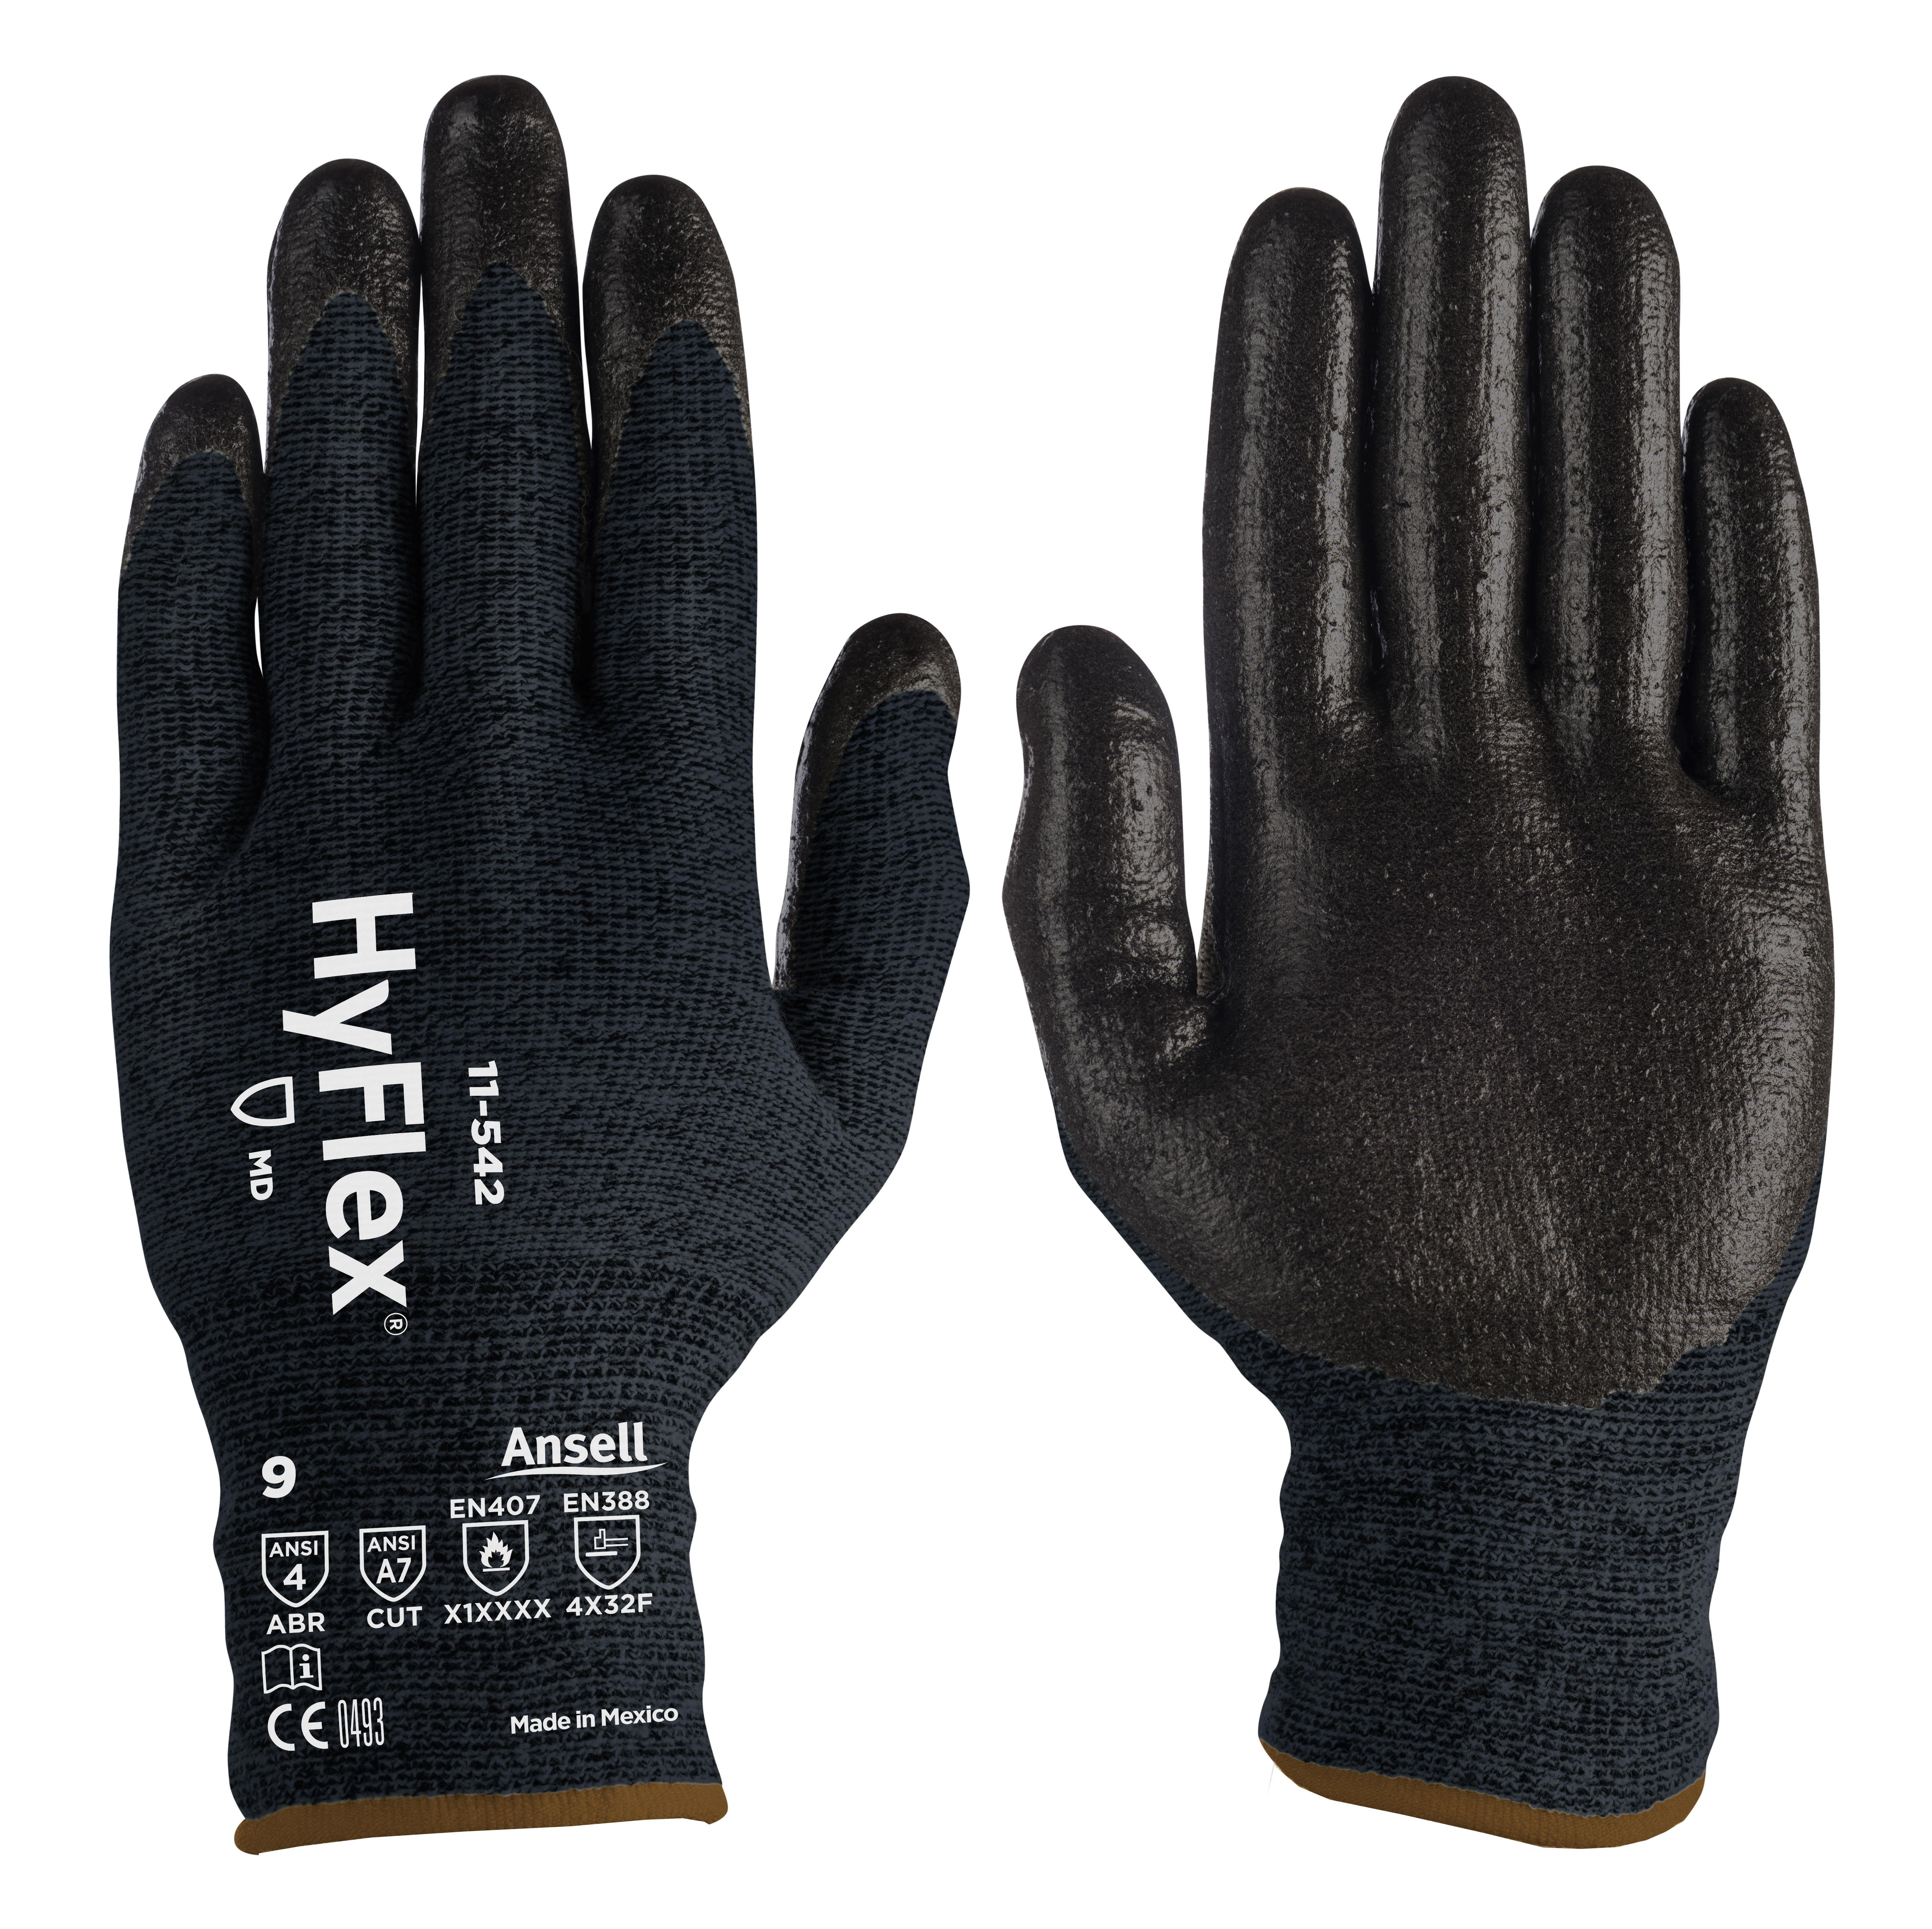 ANSELL HYFLEX 11-542 NITRILE COATED